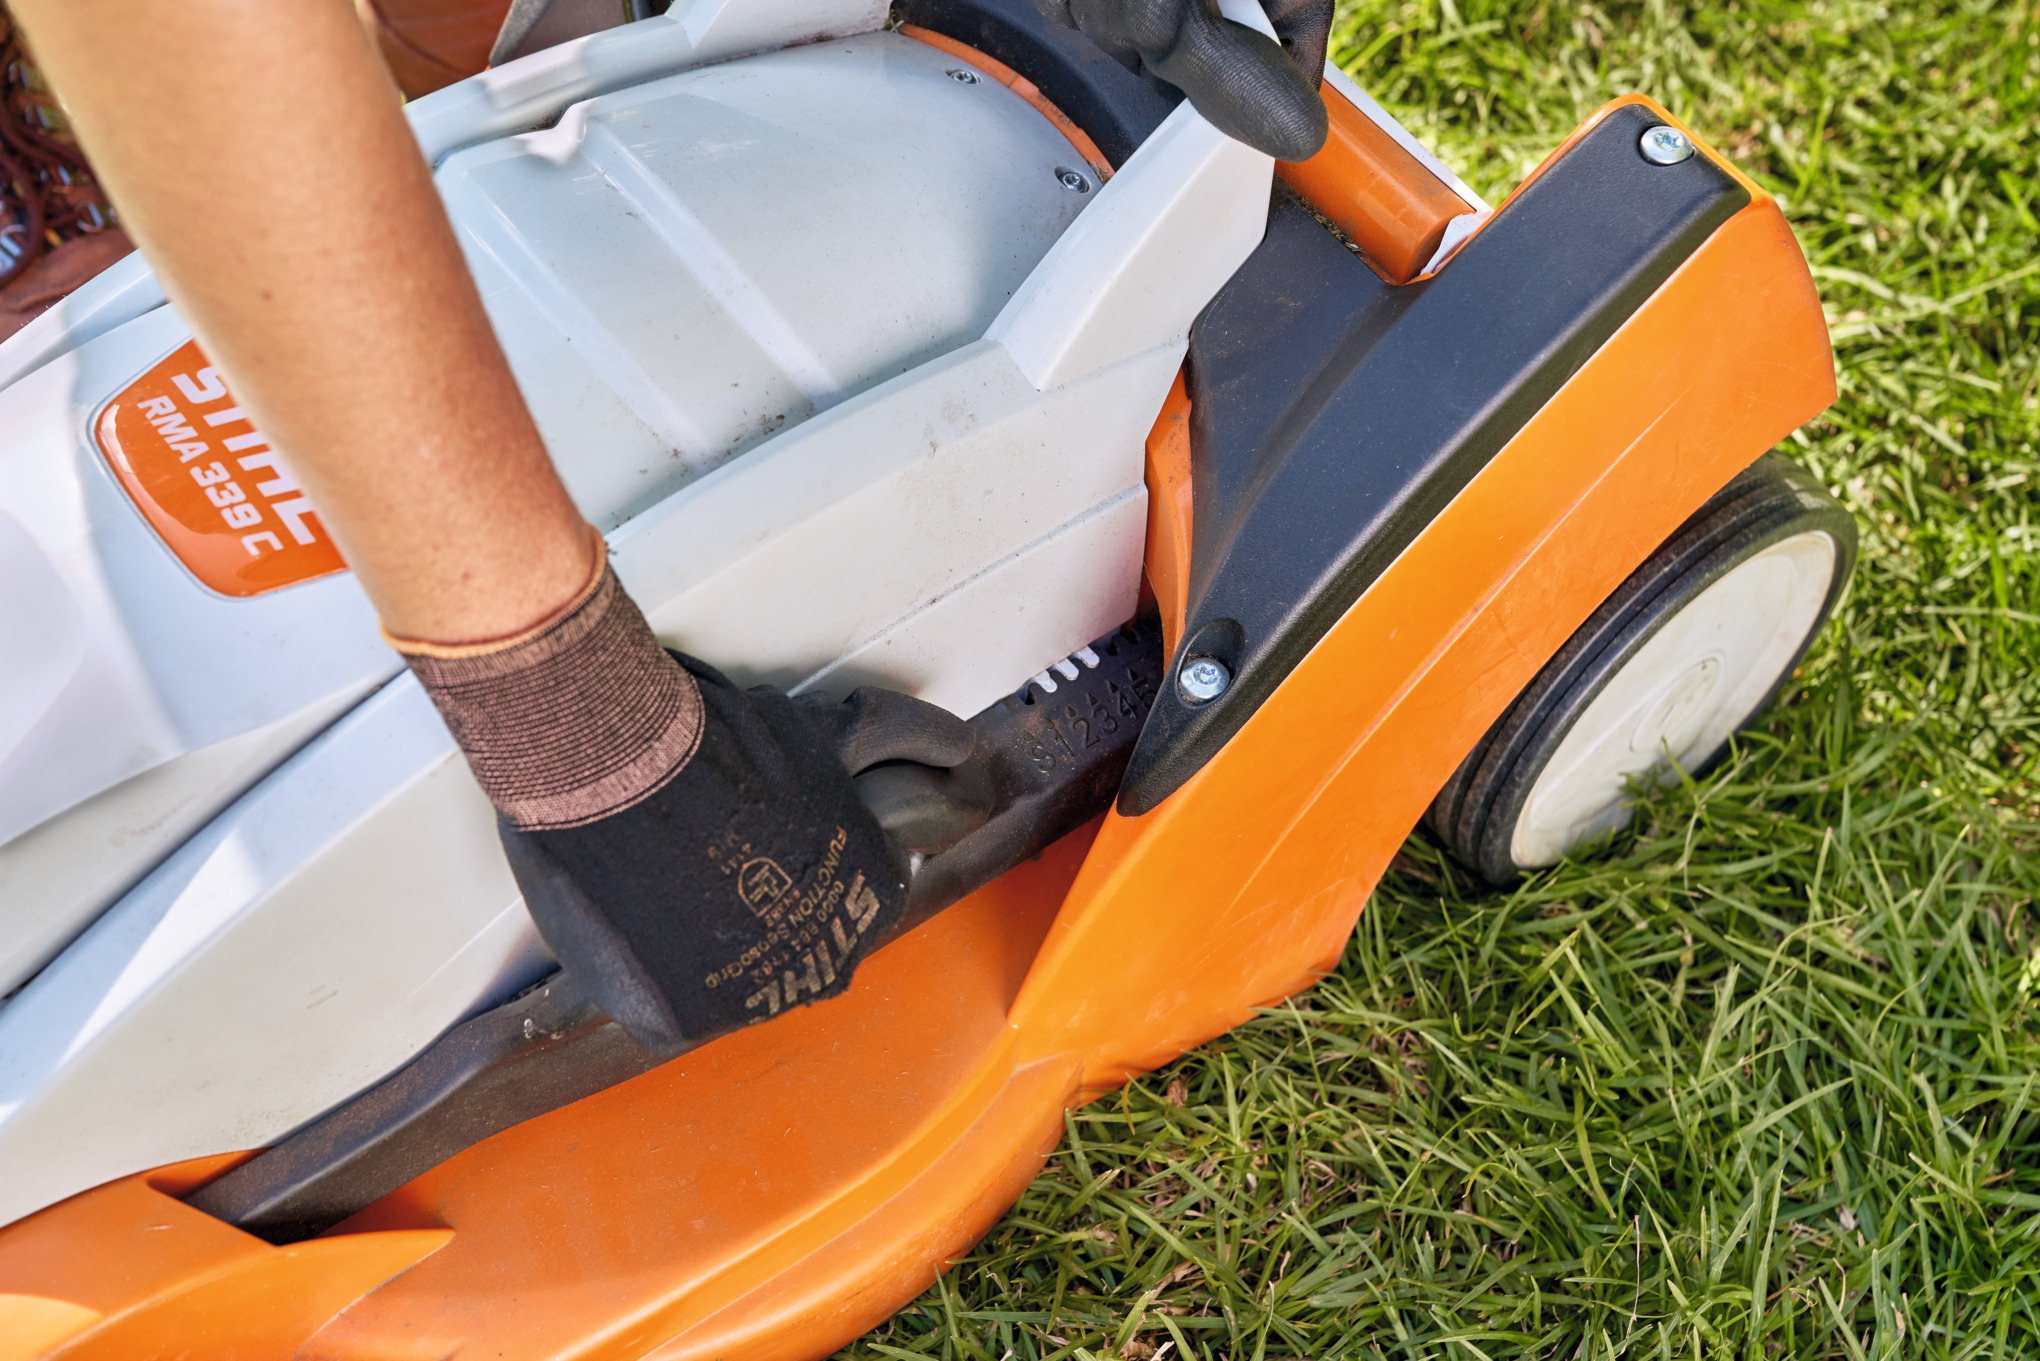 CENTRAL CUT-HEIGHT ADJUSTMENT FOR LAWN MOWERS